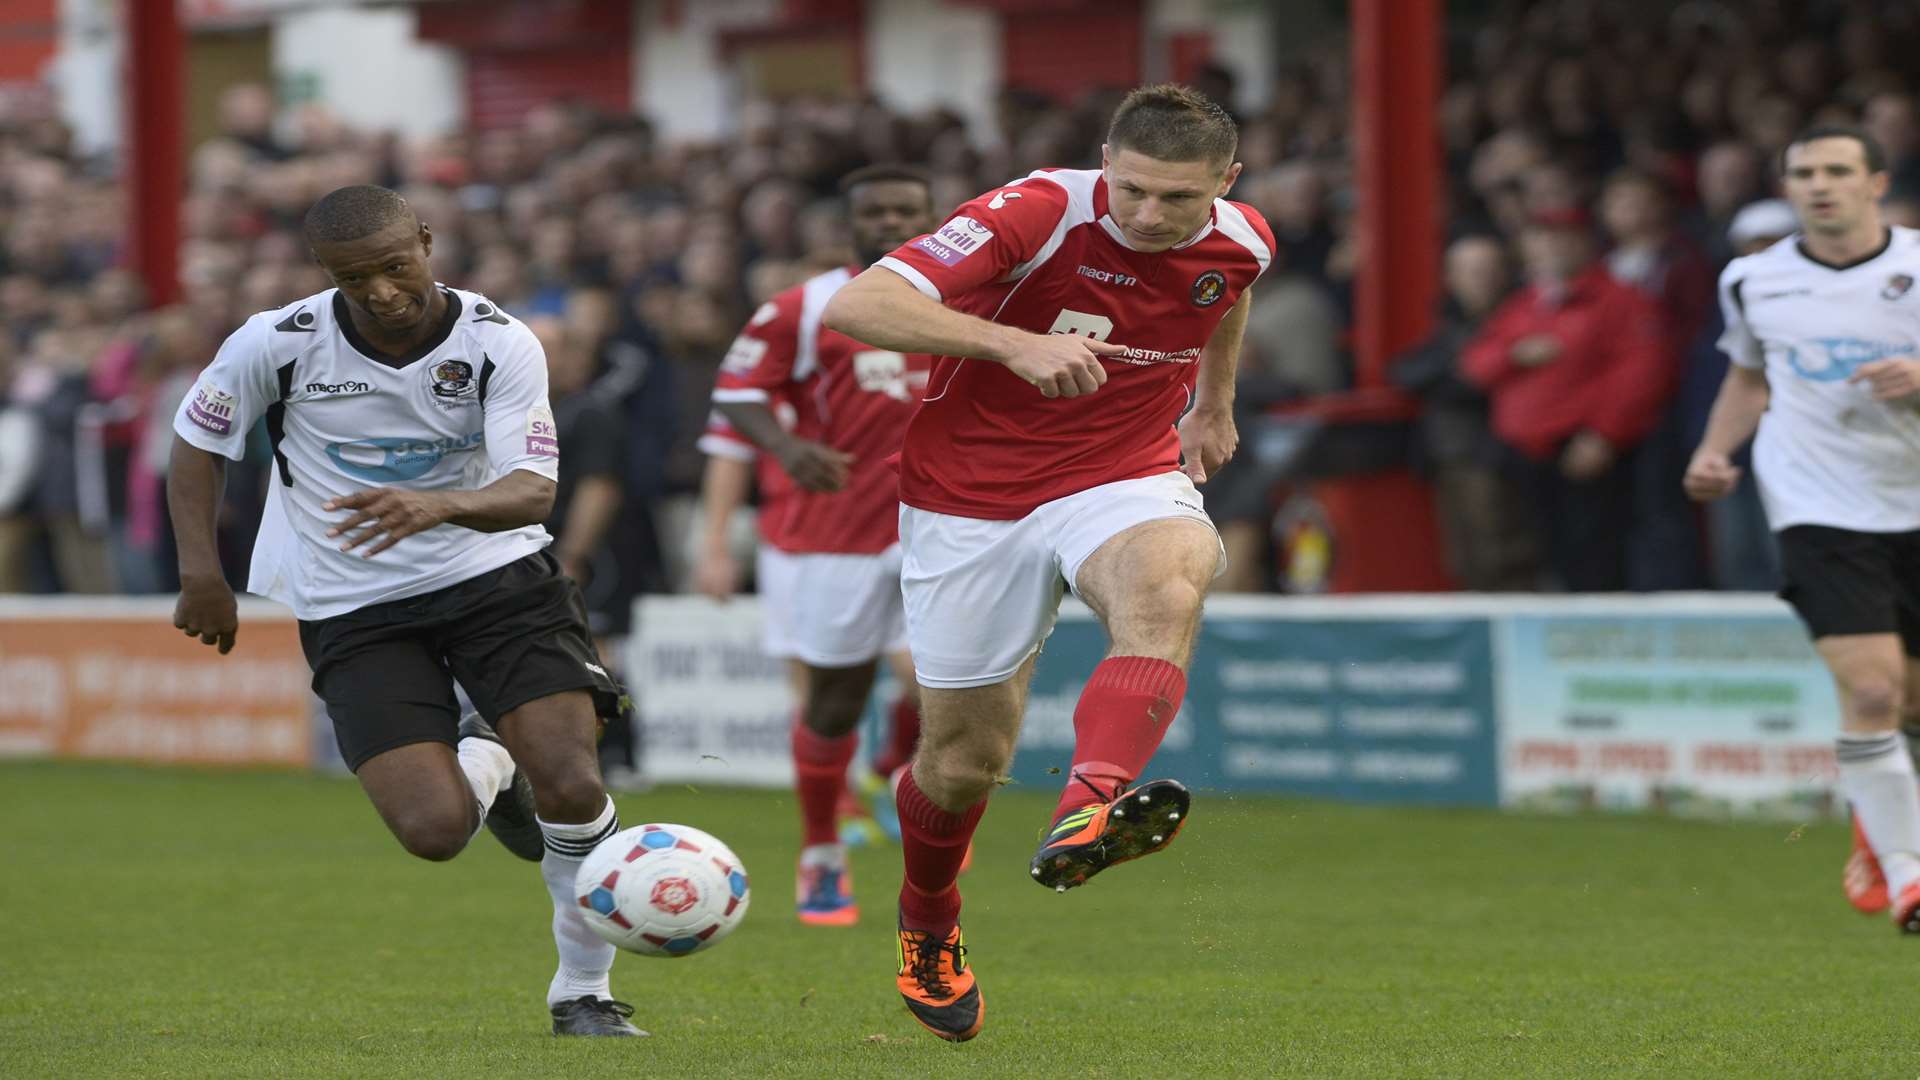 Paul Lorraine in action for Ebbsfleet against Dartford in 2013 Picture: Andy Payton